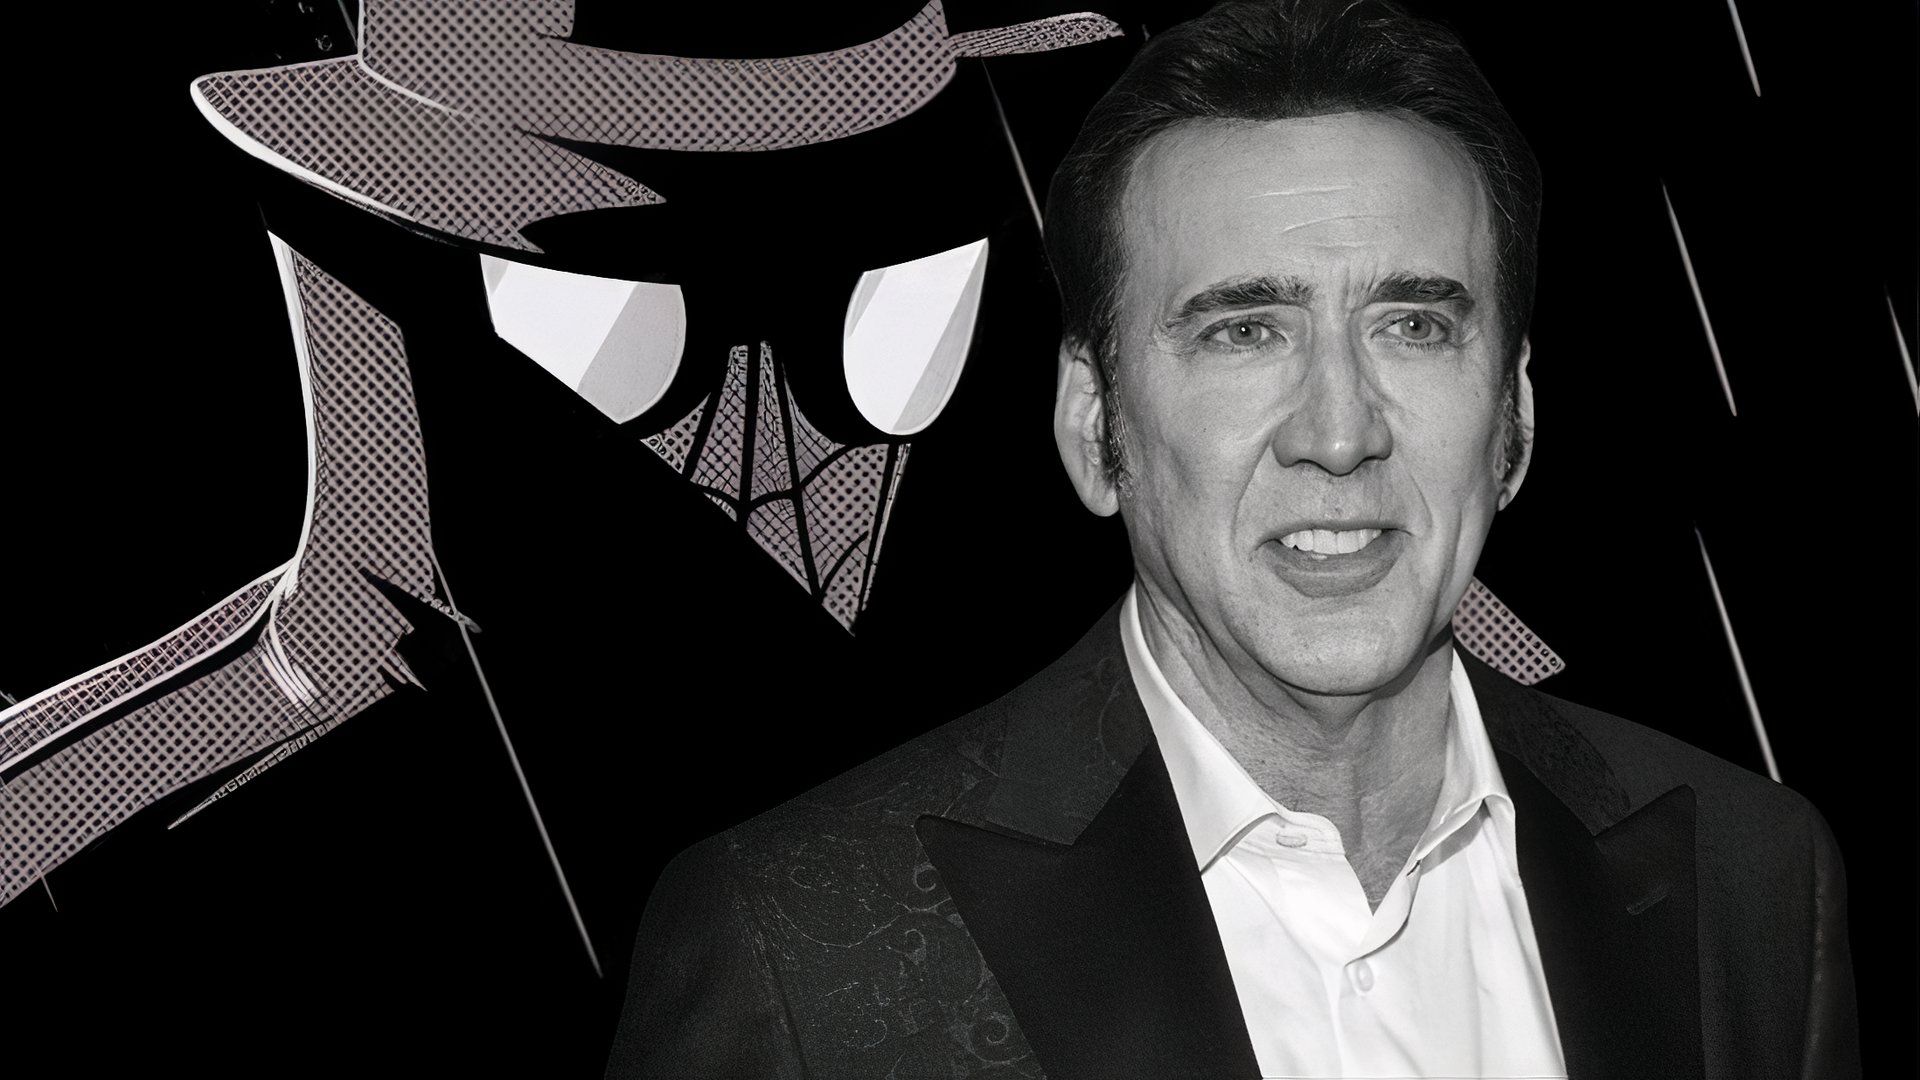 An edited image of Nicolas Cage and Spider-Man Noir from Into the Spider-Verse